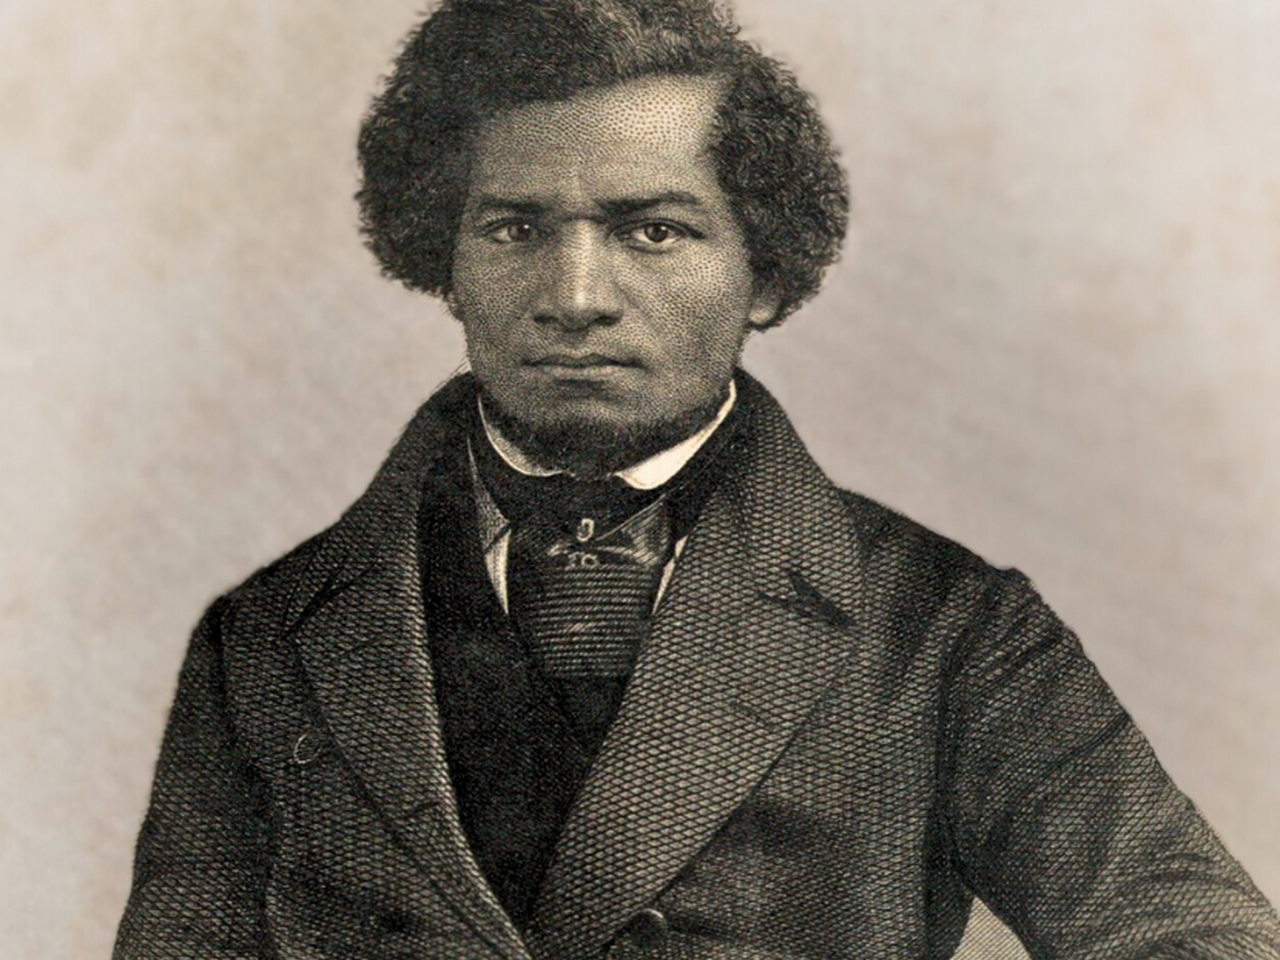 View of Frederick Douglass's portrait taken from his autobiography My Bondage and my Freedom